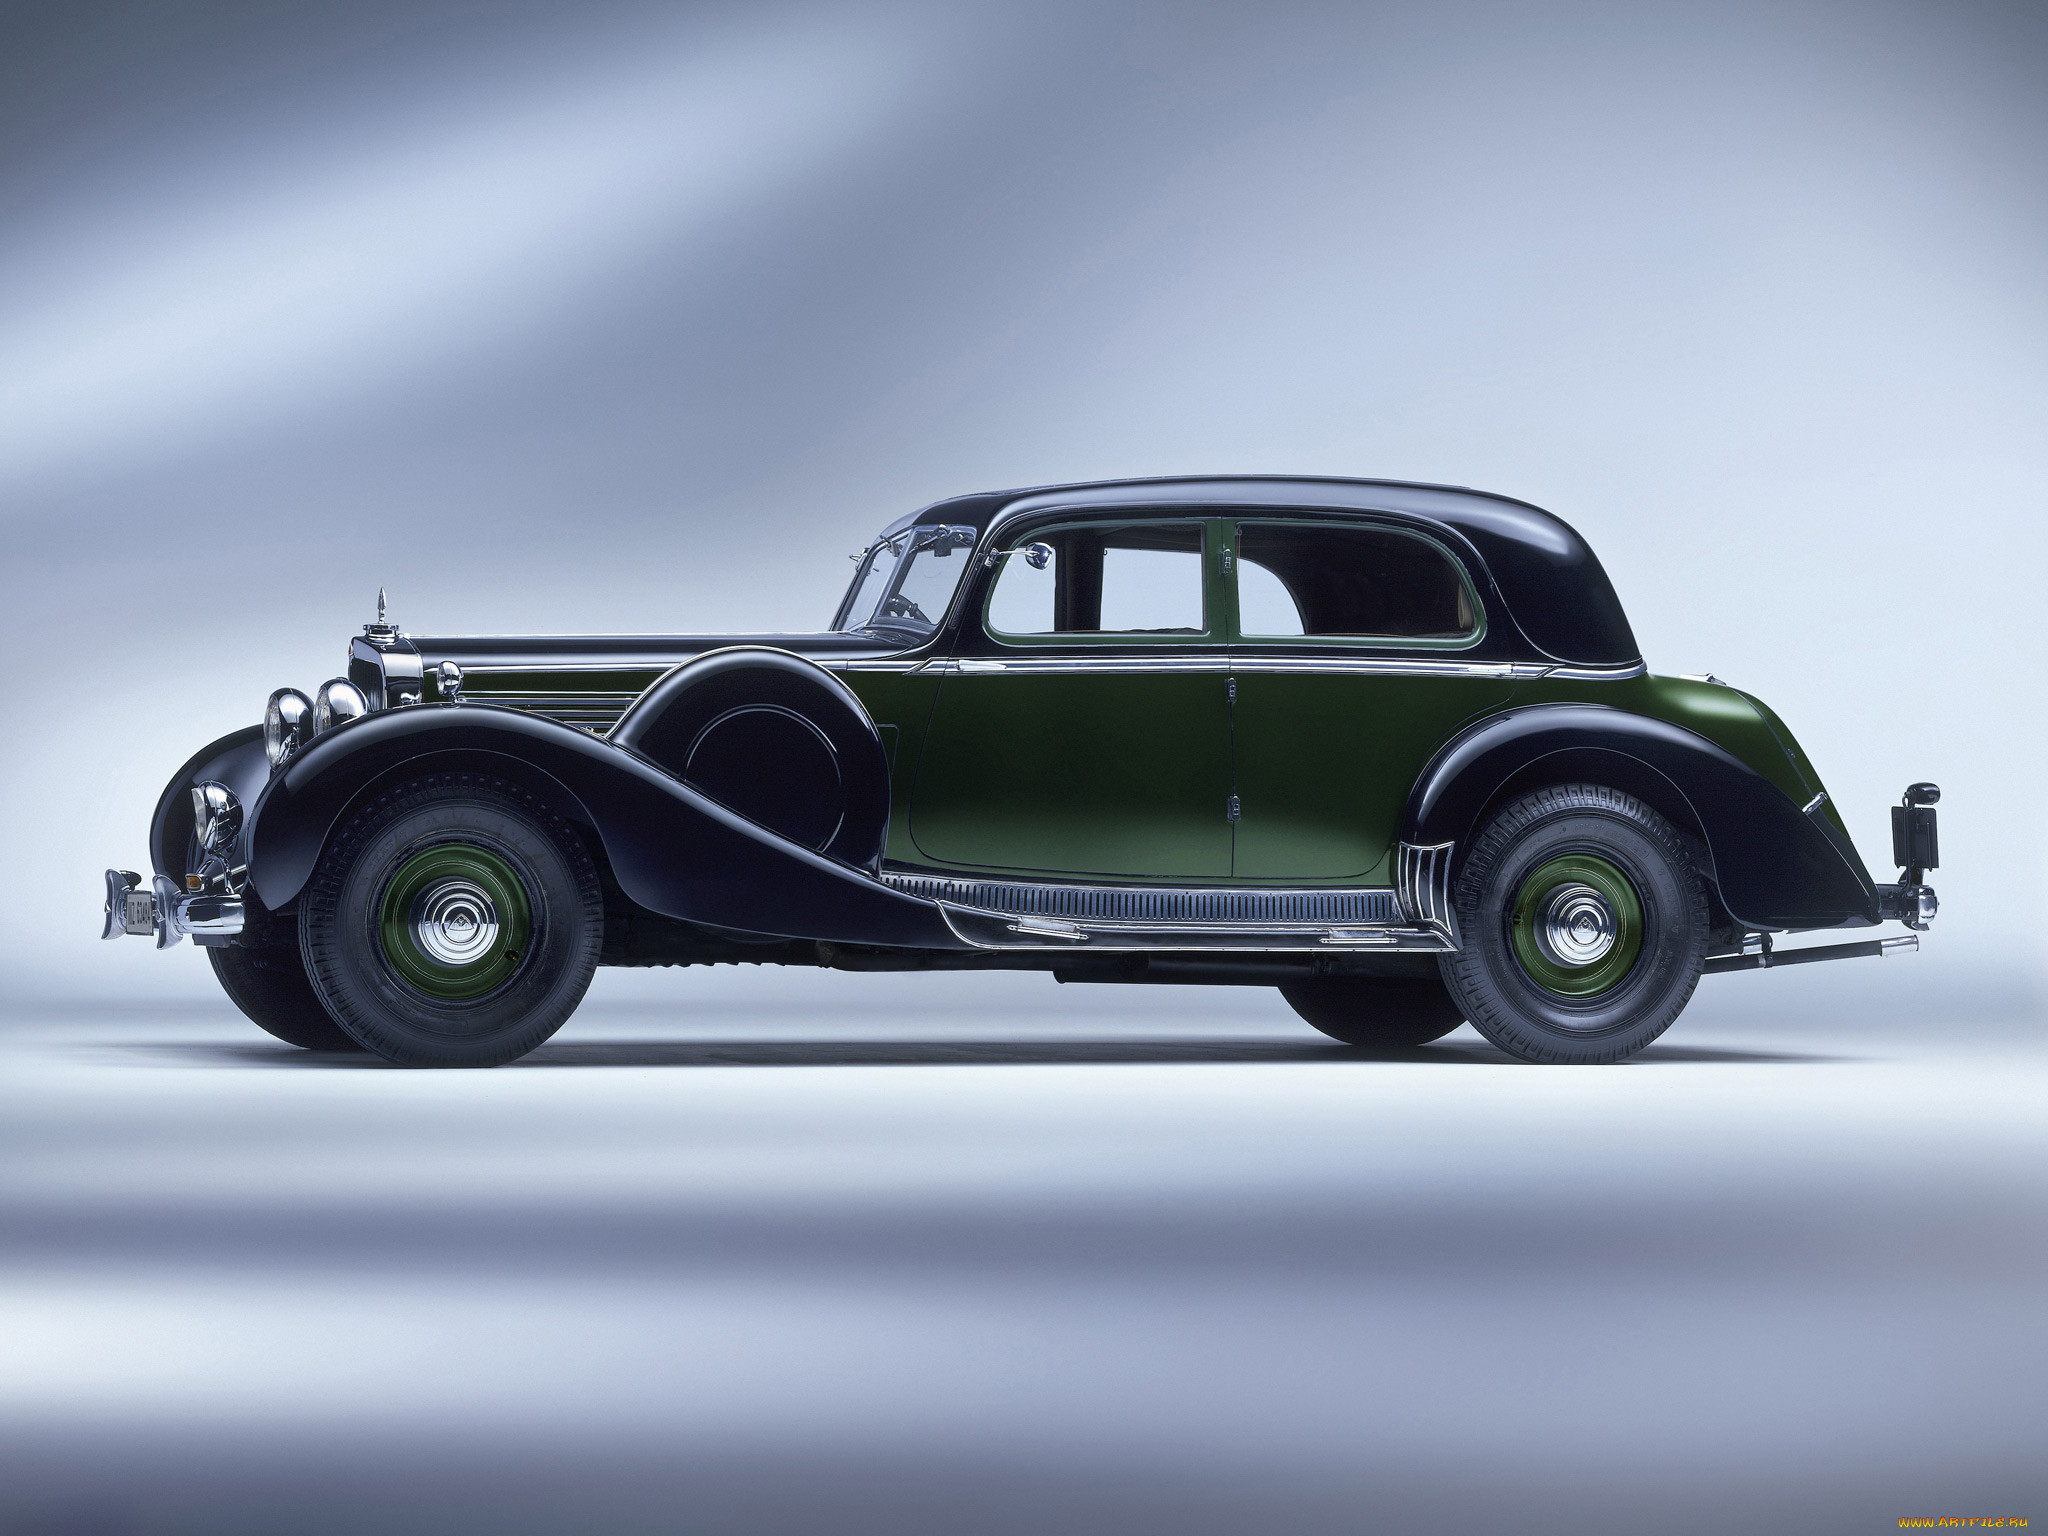 maybach zeppelin ds8 coupe limousine 1938, , , ds8, zeppelin, maybach, 1938, limousine, coupe